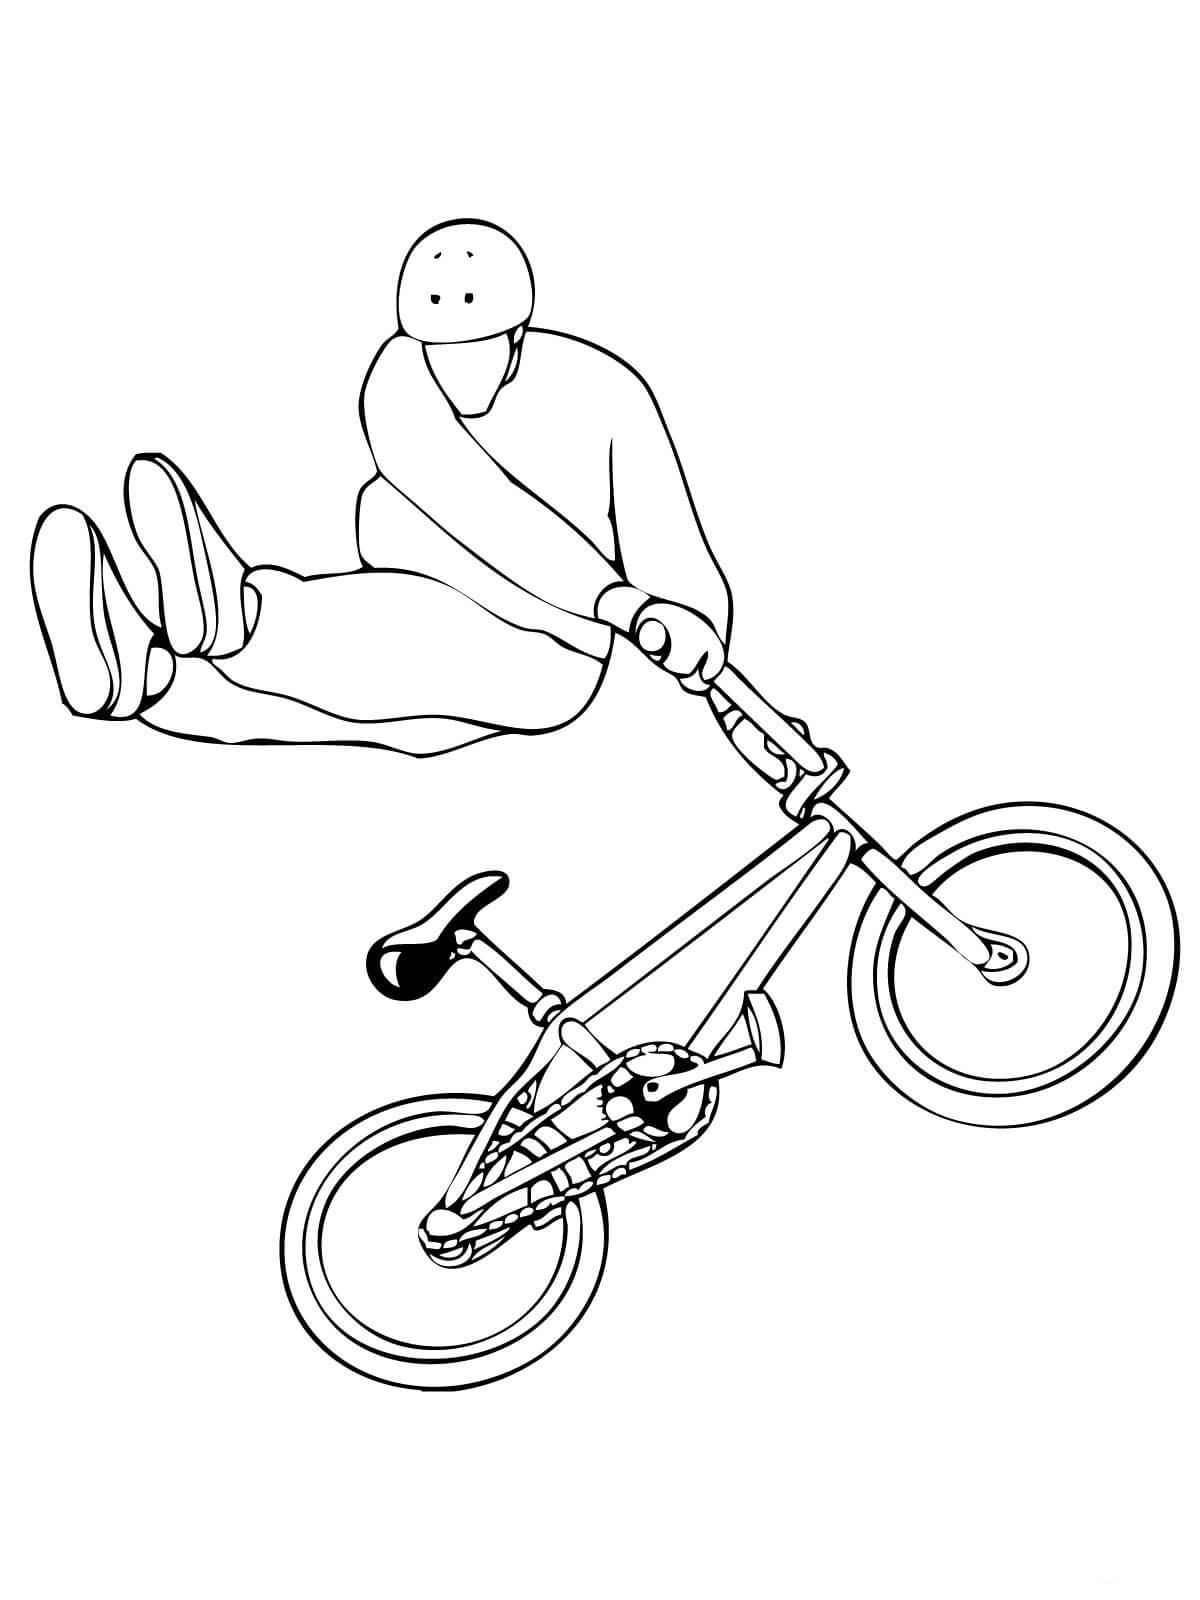 Tail Whip Bmx Bicycle Coloring Page